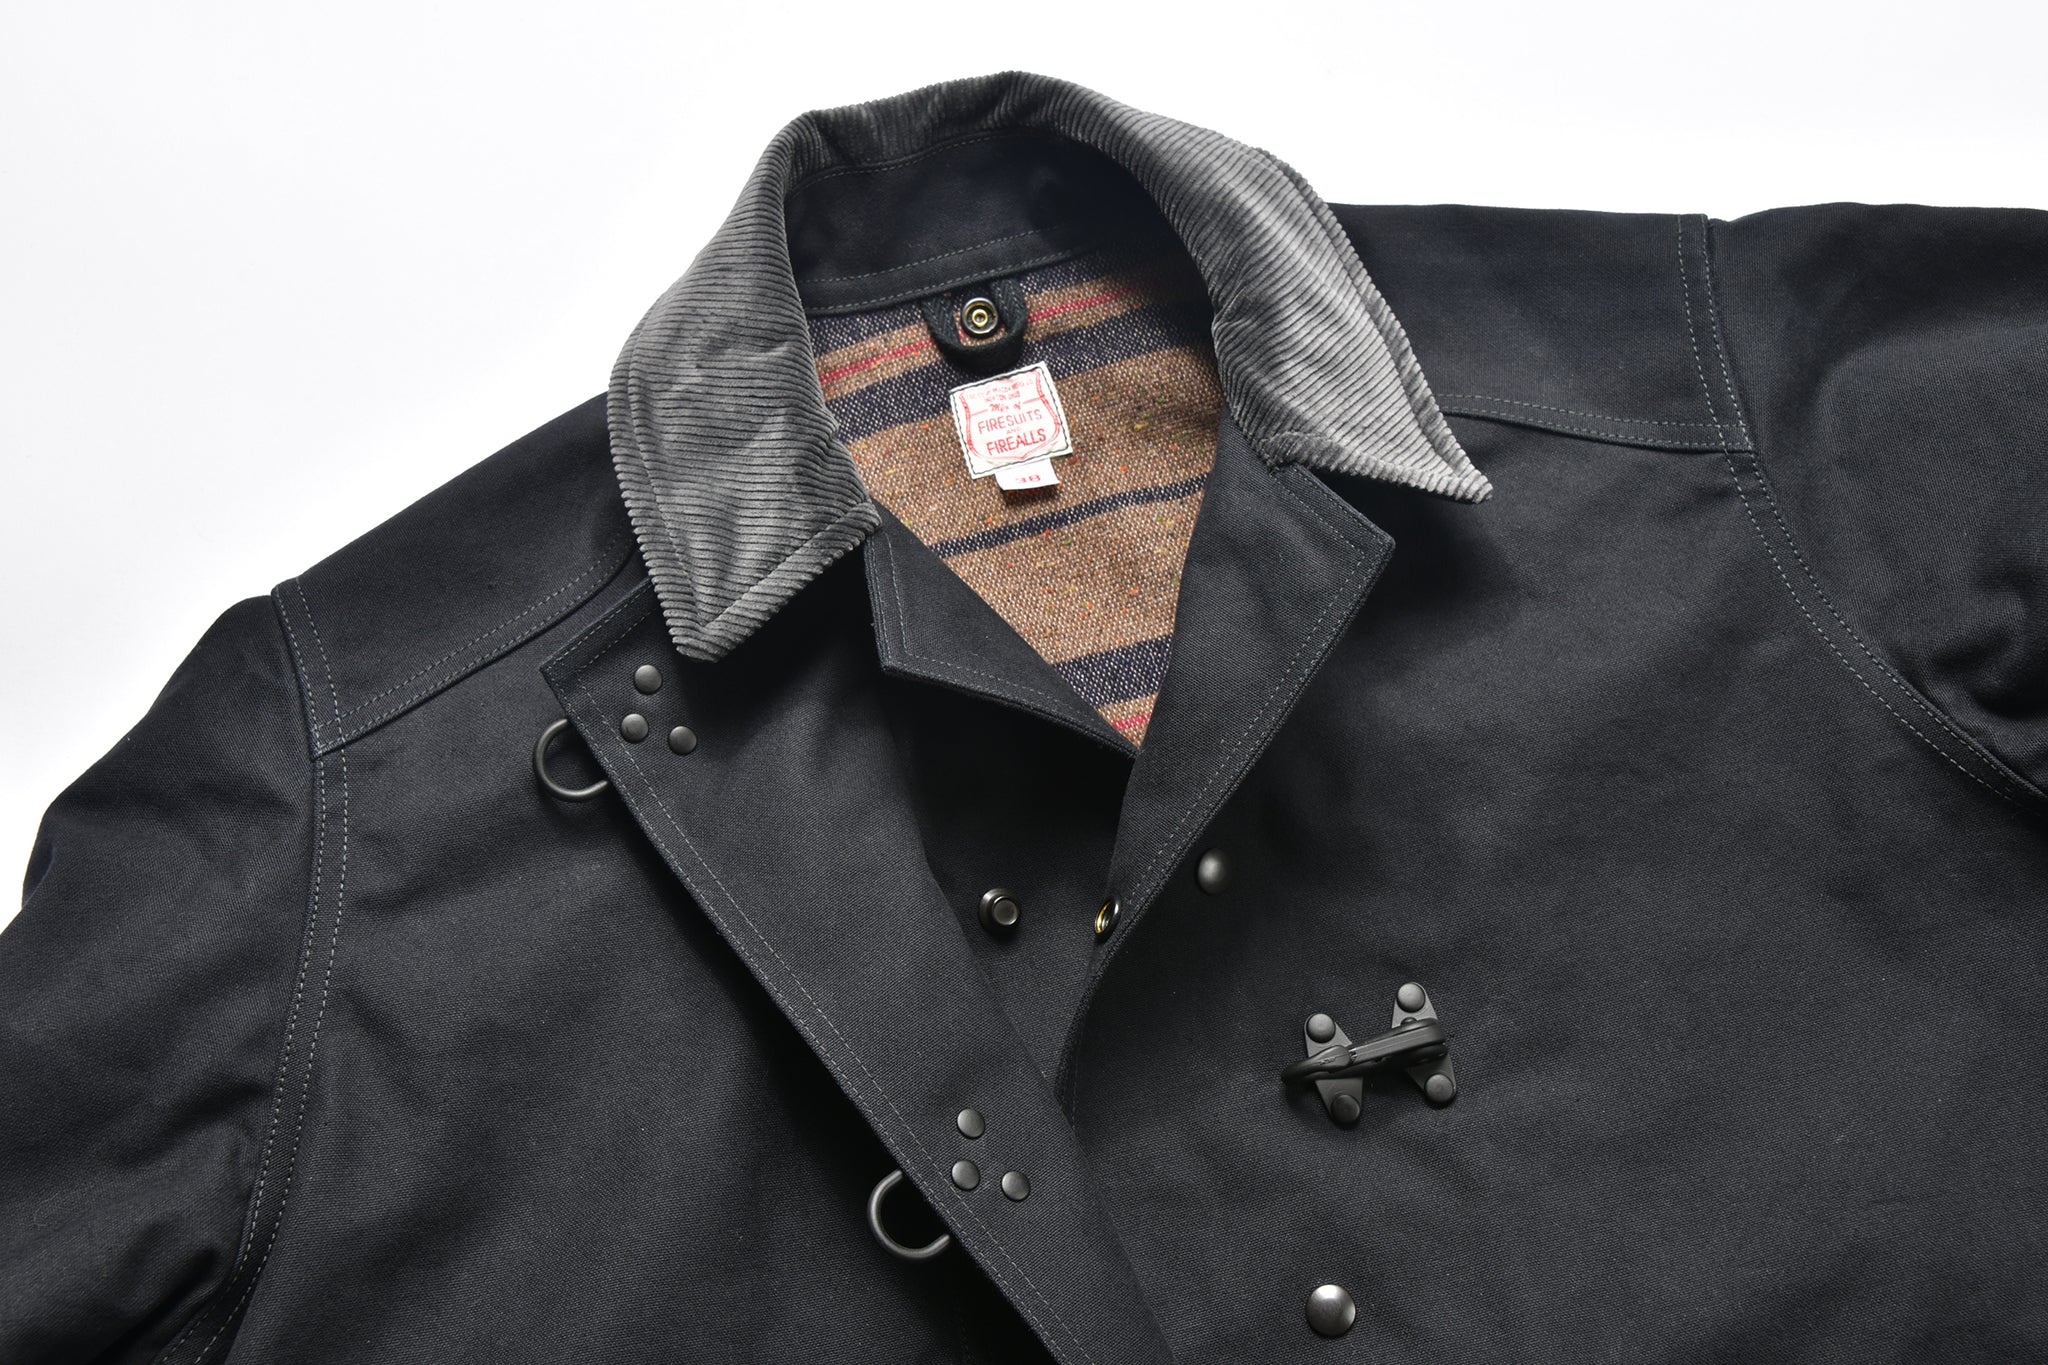 Fireman Jacket ・ Made in Italy 【oldReal】-